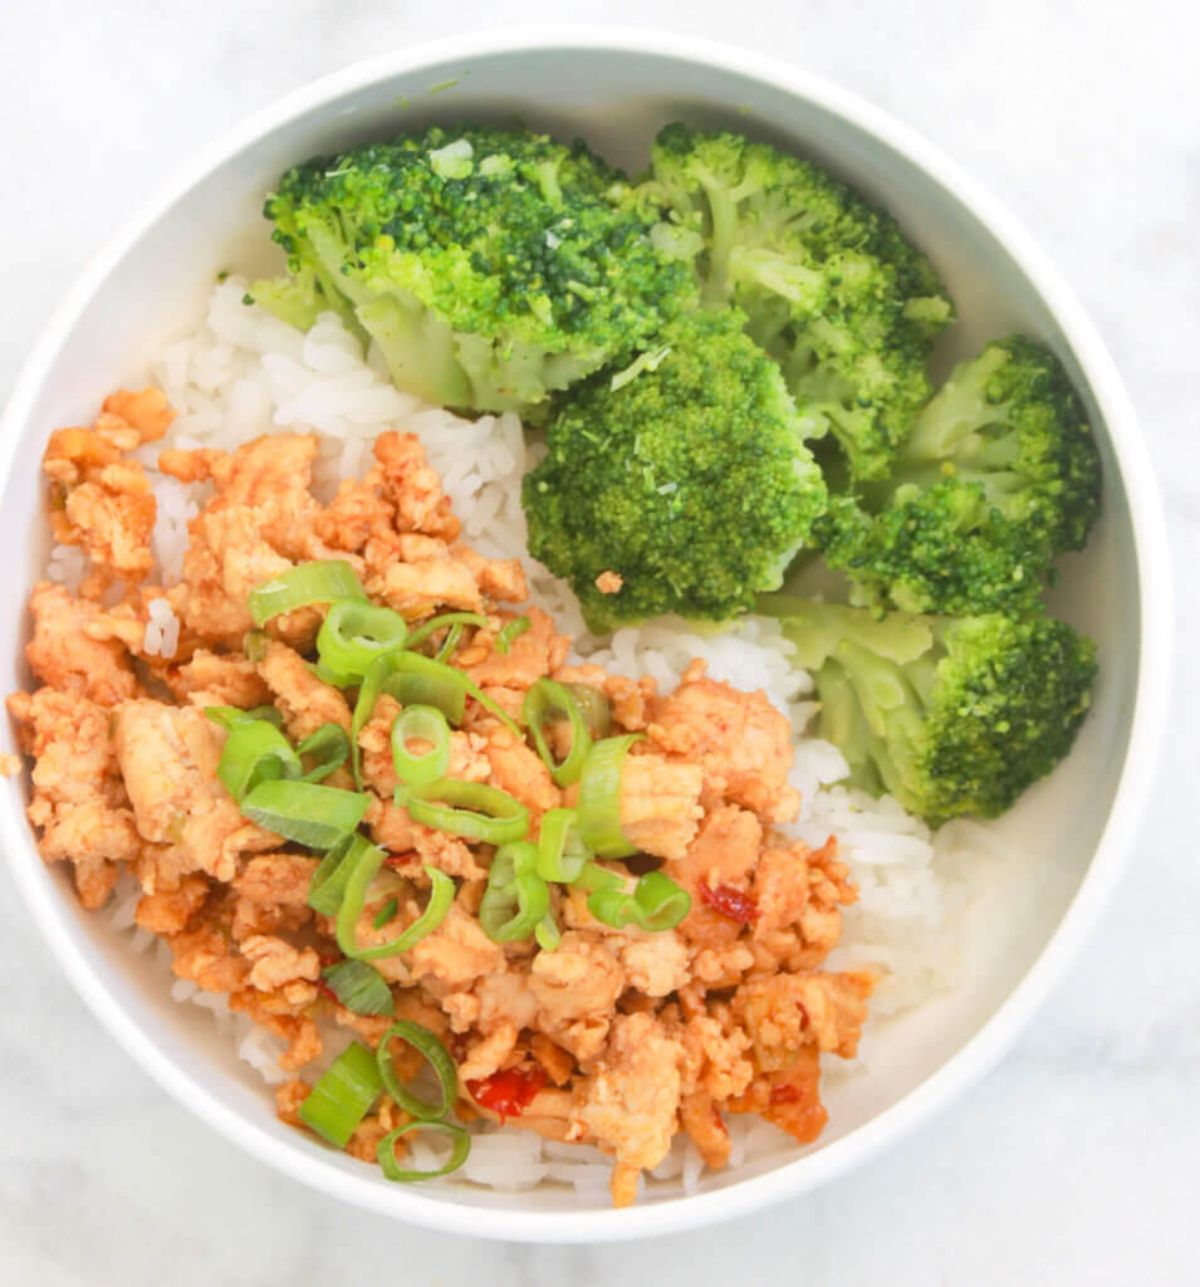 Asian Ground Chicken with broccoli and rice in a white bowl.